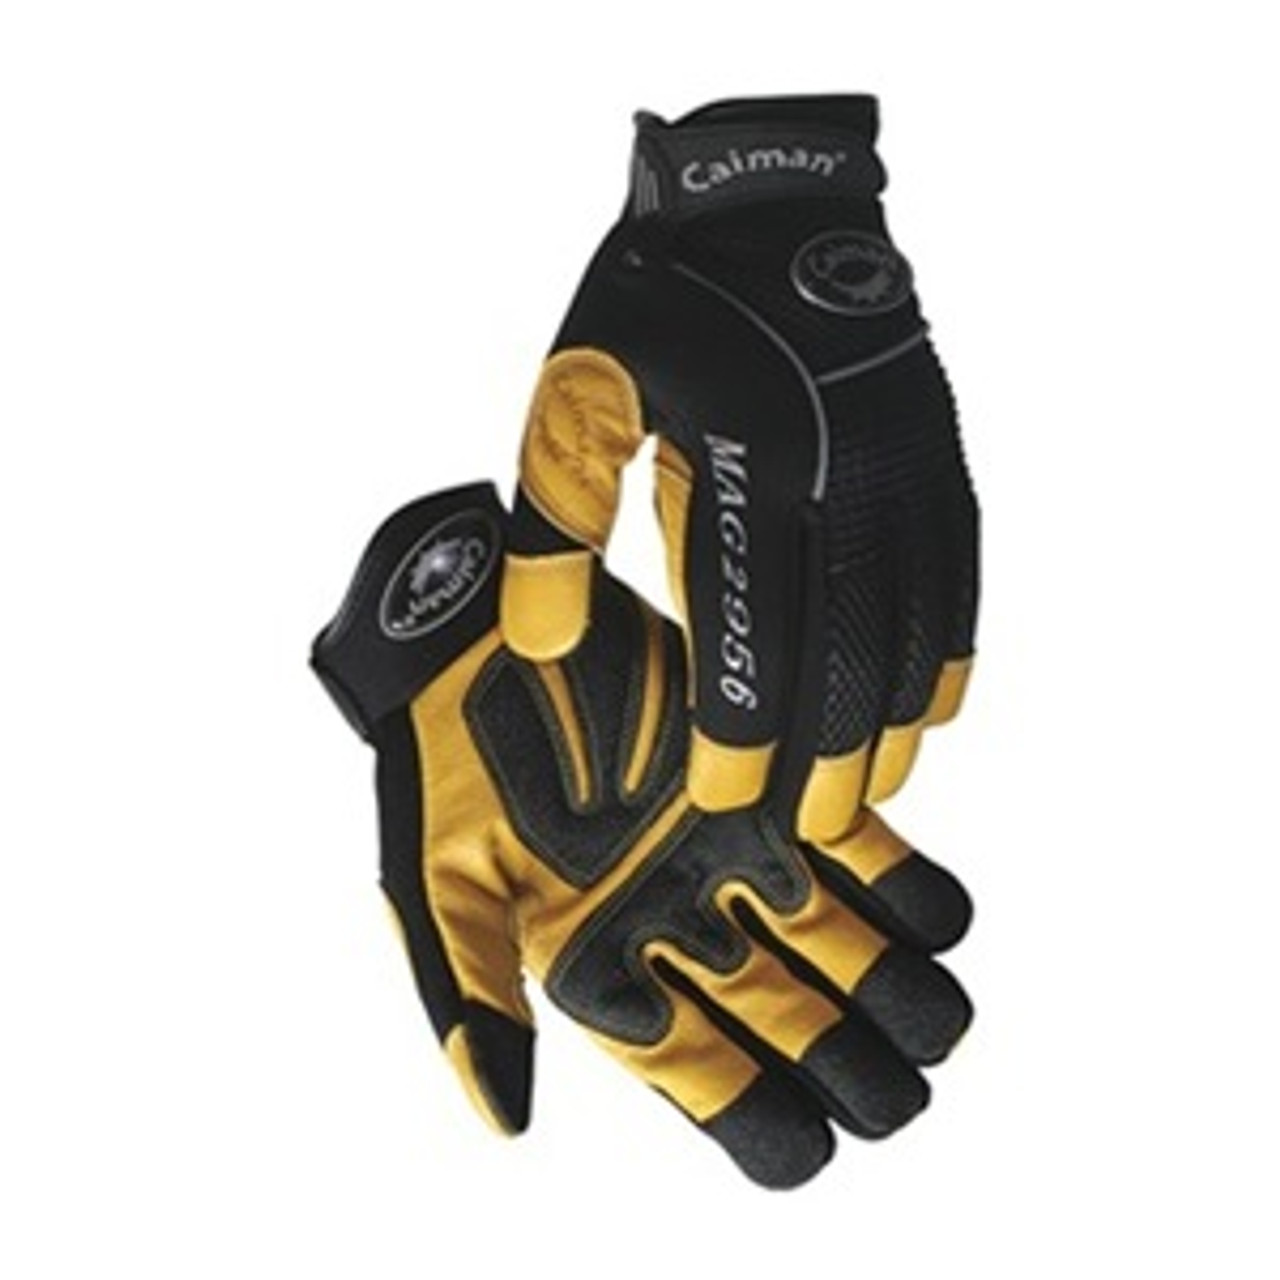 Caiman® Natural Pigskin Leather Mechanics Gloves : Mechanic Gloves :  Industrial Safety Gloves and Hand Protection